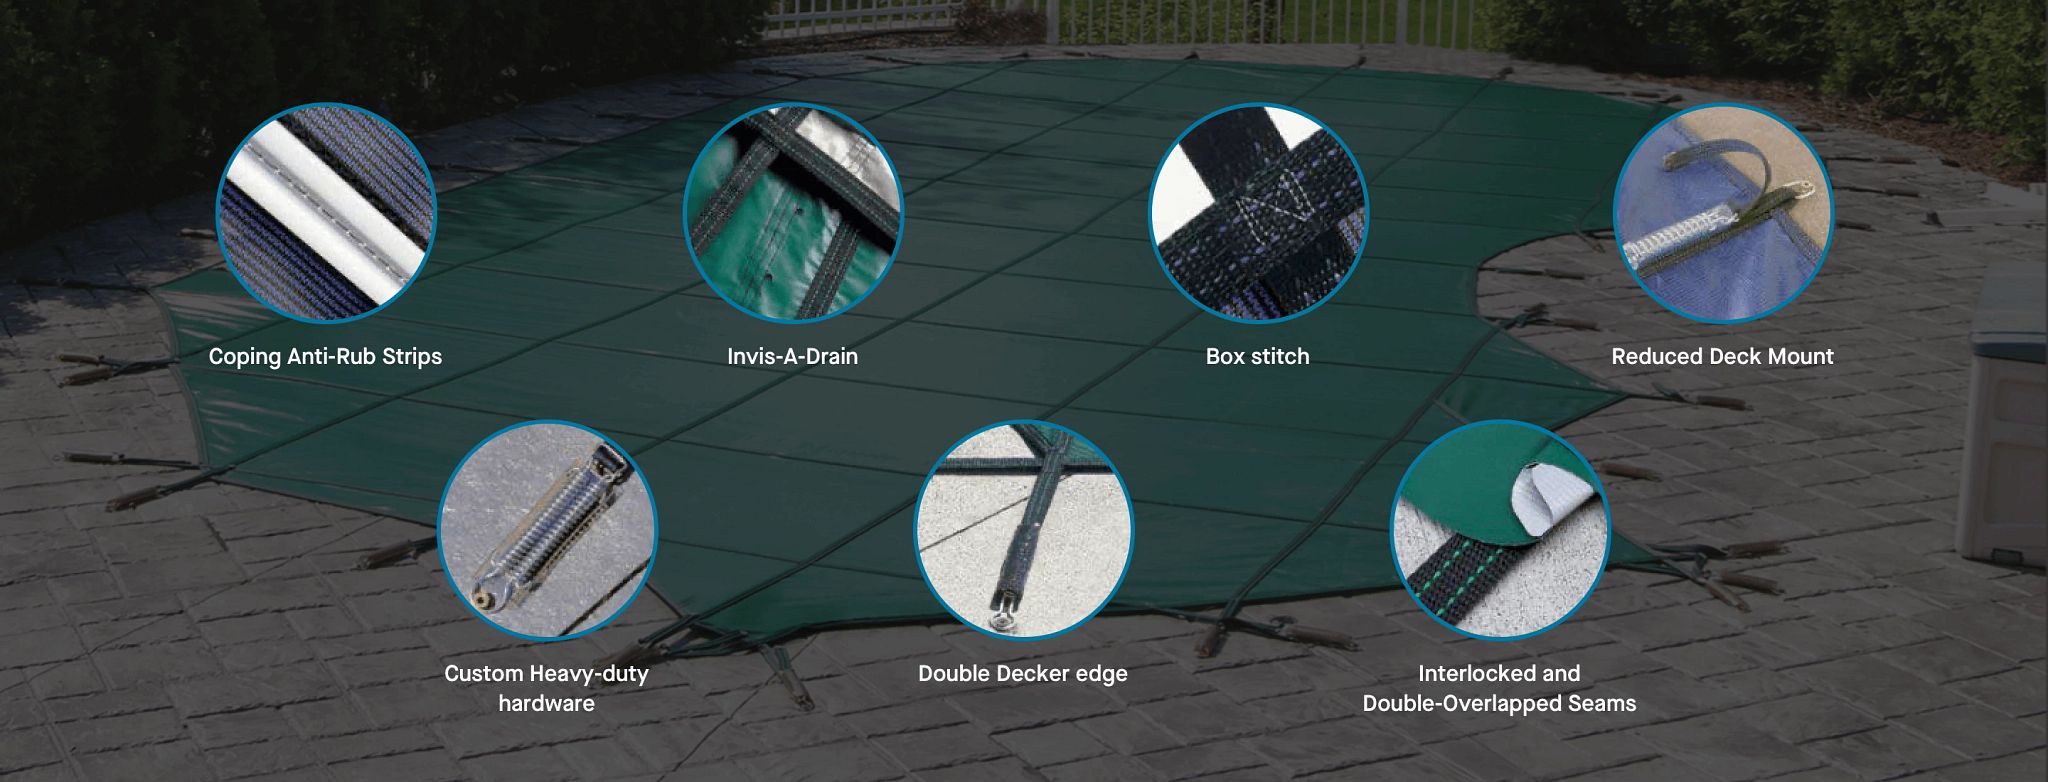 Installation Hardware for In Ground Pool Mesh or Solid Winter Safety Covers